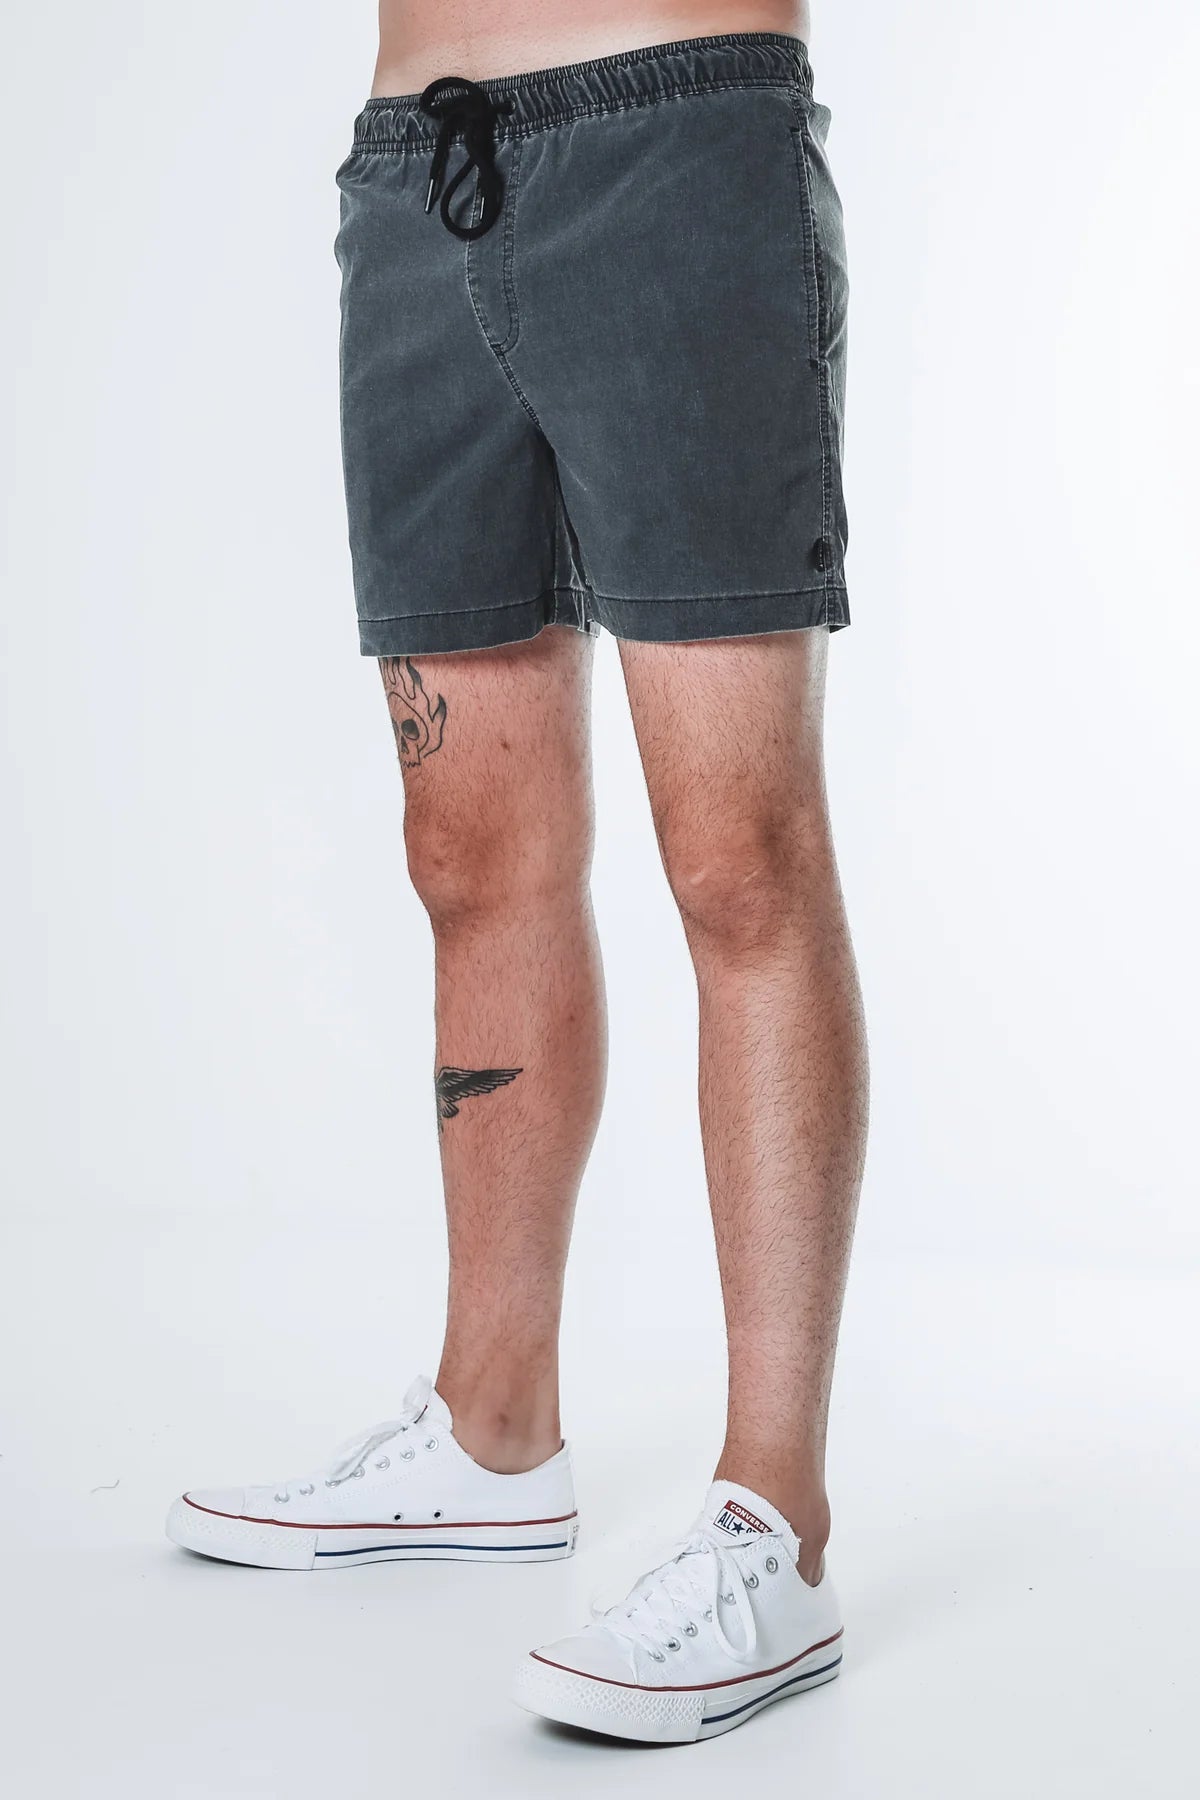 Silent theory dos beach short - washed black